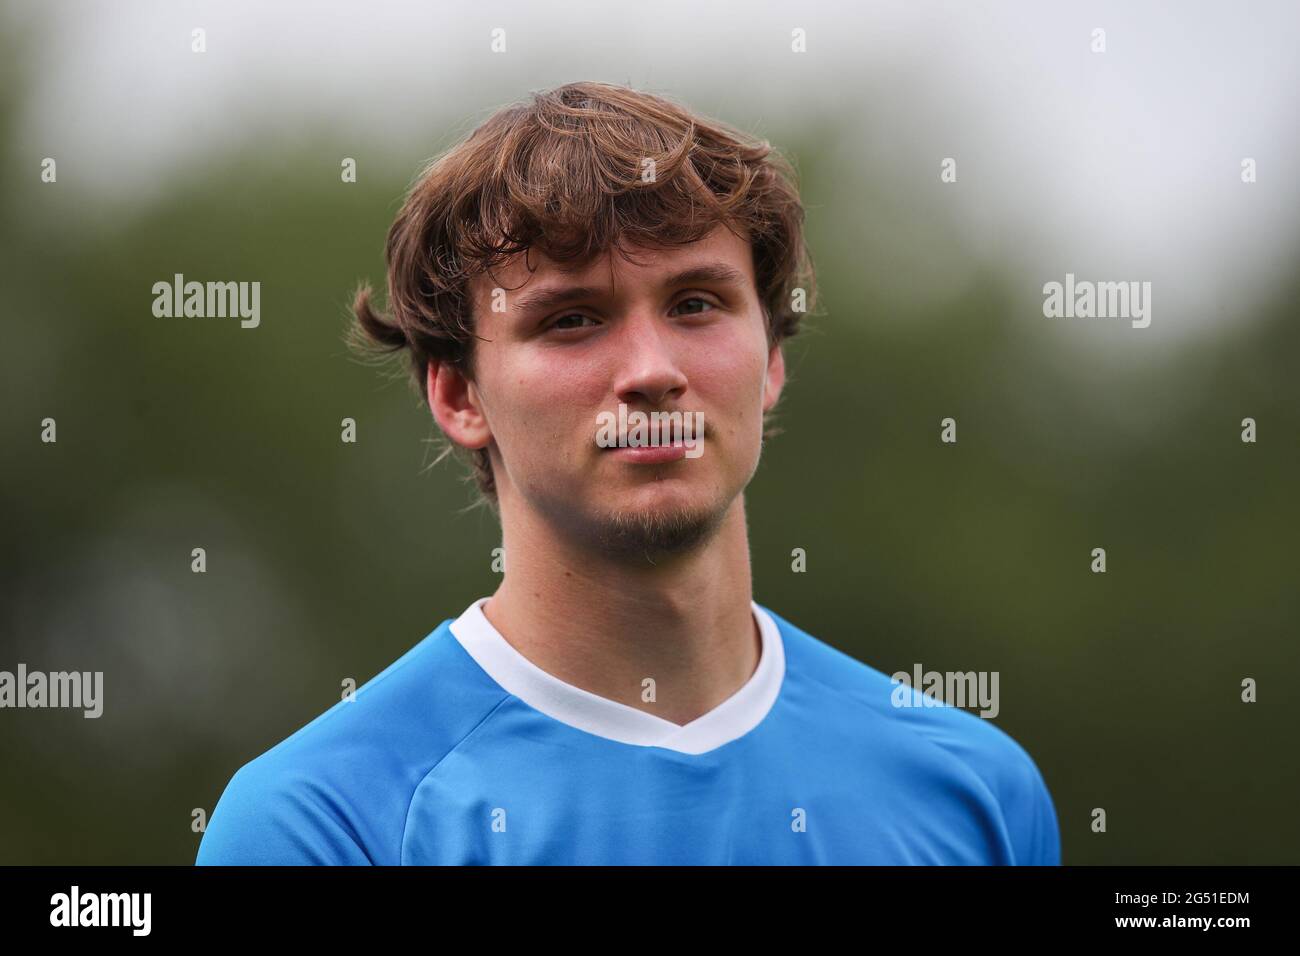 ZWOLLE, NETHERLANDS - JUNE 24: Rav van den Berg of PEC Zwolle during the first First training of the season of PEC Zwolle of season 2021-2022 at Sportpark de Elshof on June 24, 2021 in Zwolle, Netherlands. (Photo by Ben Gal/Orange Pictures) Stock Photo